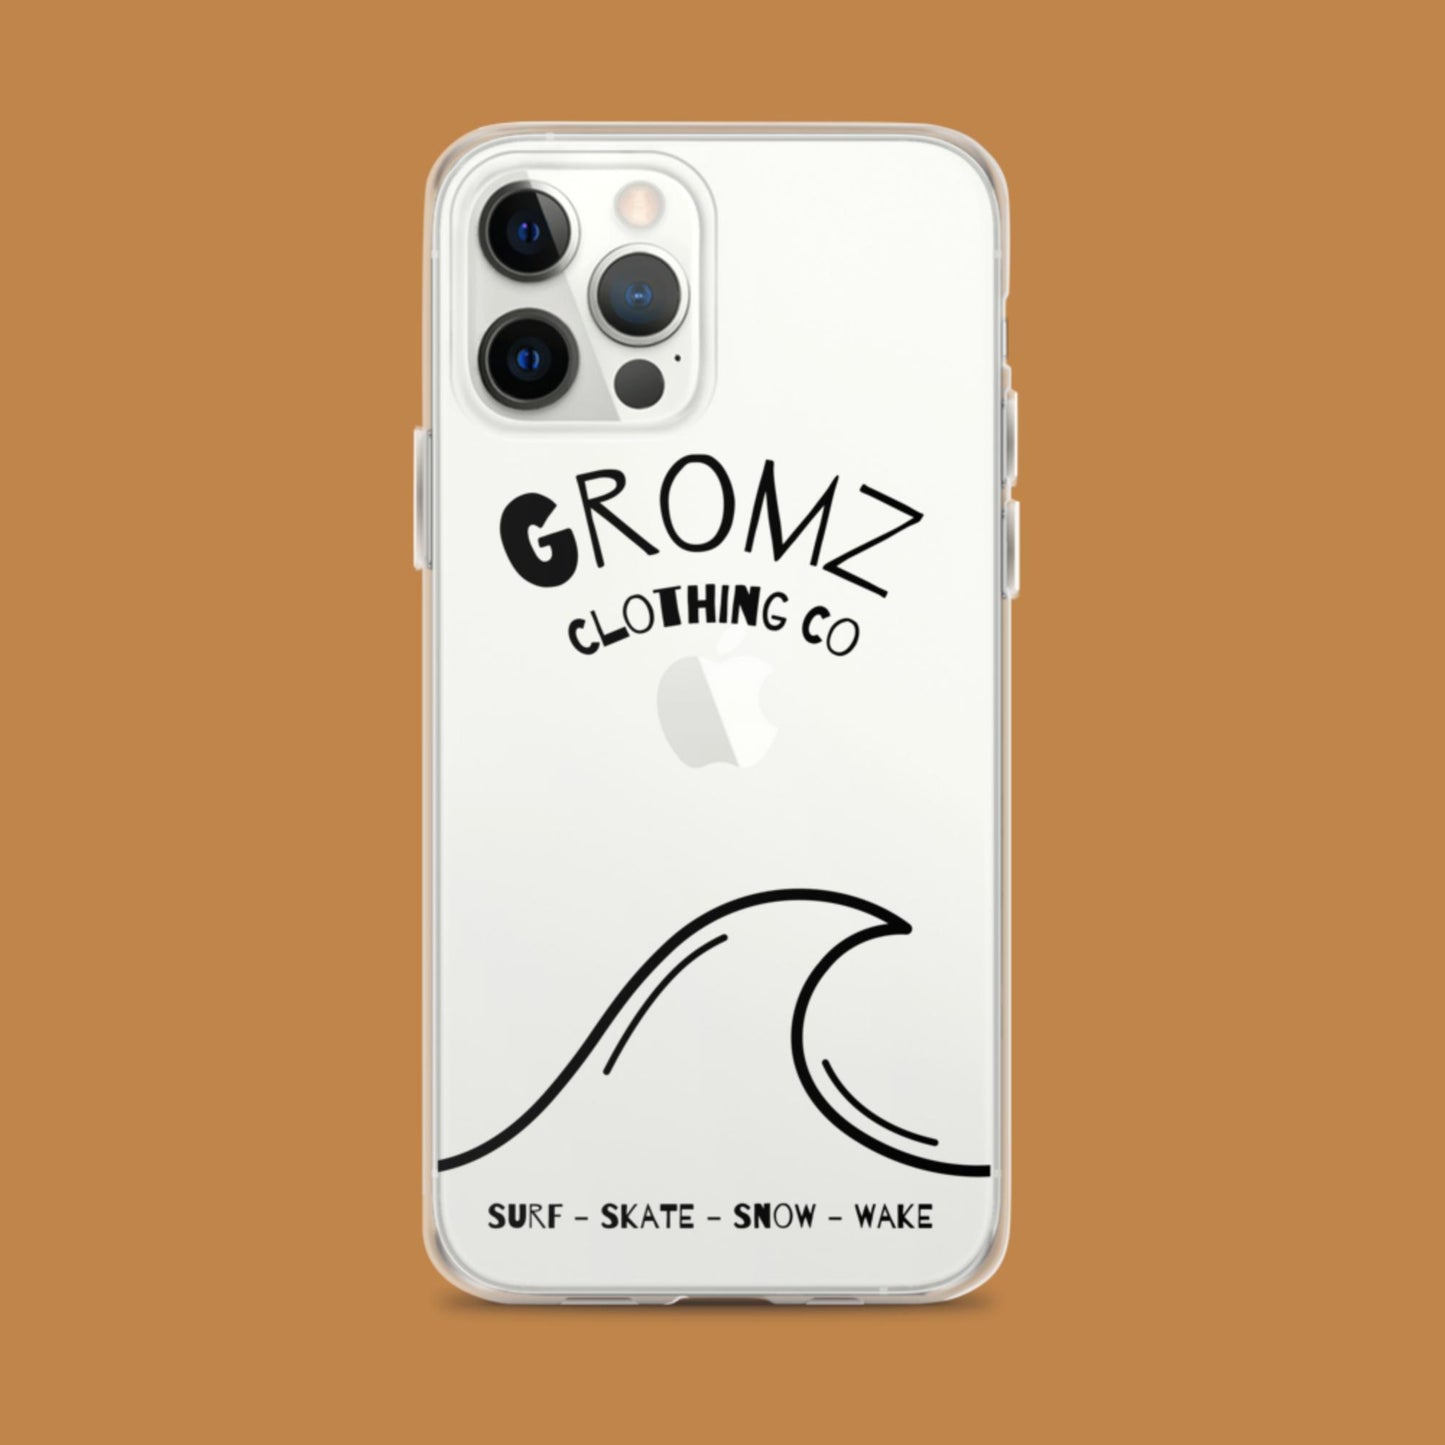 iPhone Case "paddle paddle" collection by GROMz Clothing Co.